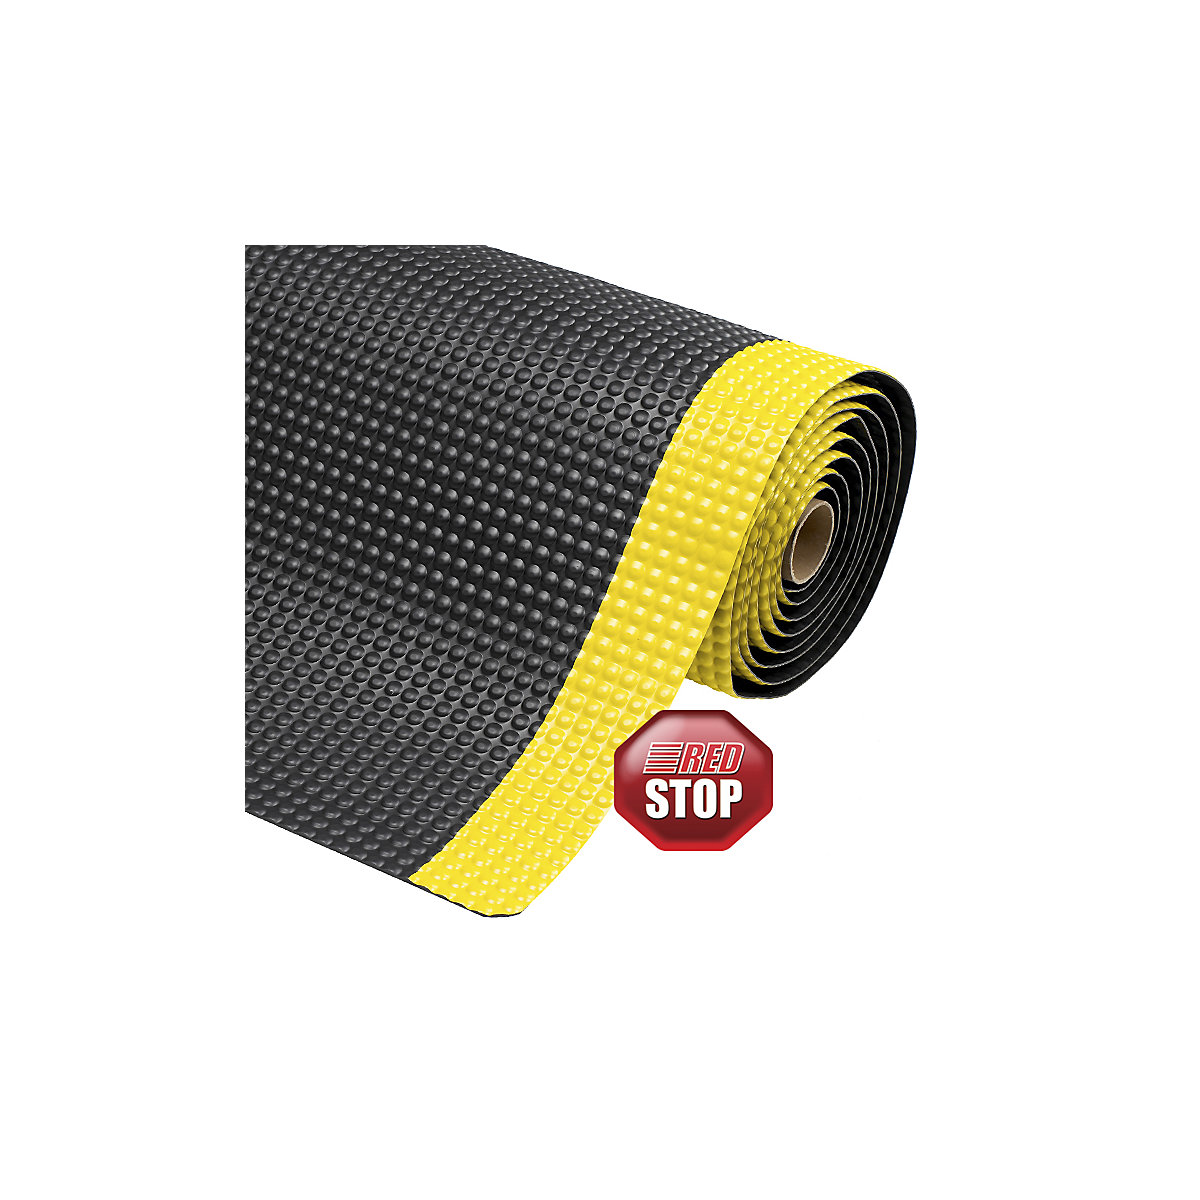 Sky Trax® workstation matting – NOTRAX, width 910 mm, sold by the metre, black / yellow-2